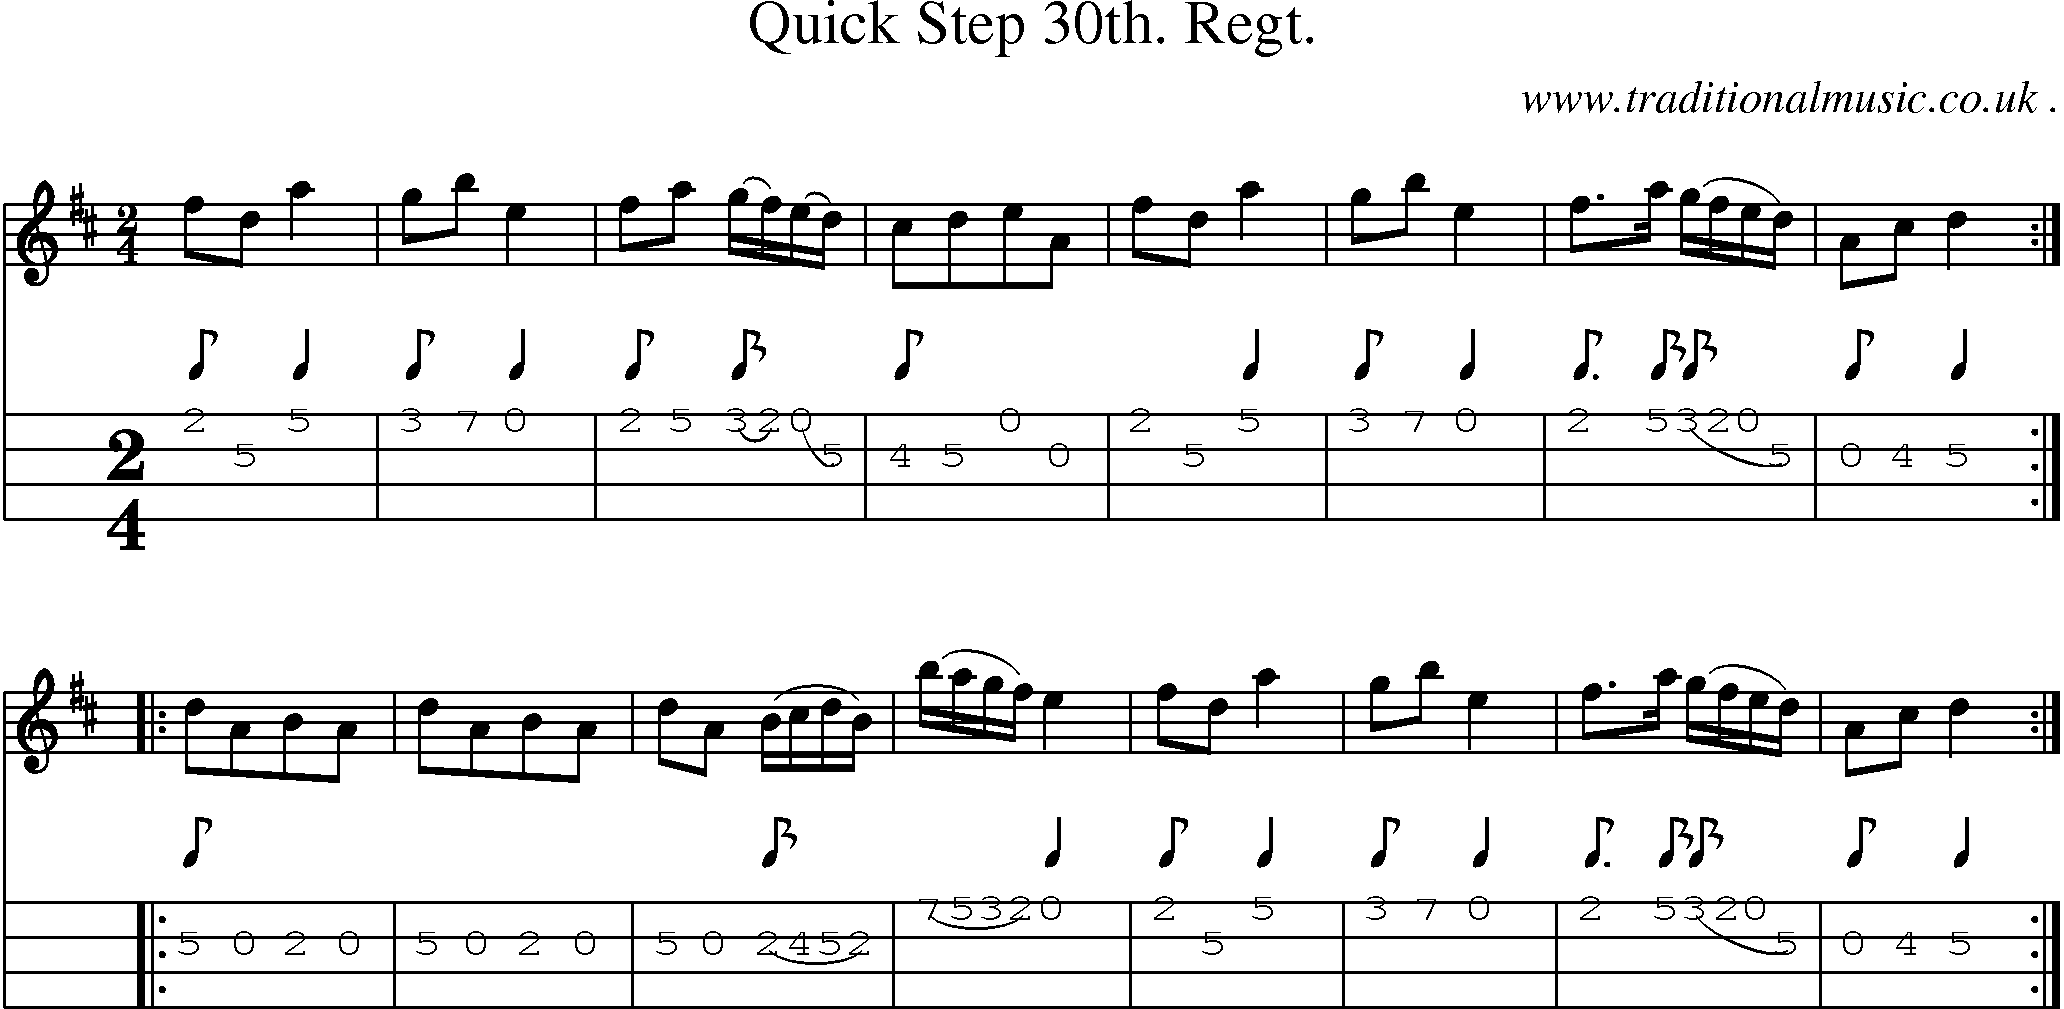 Sheet-music  score, Chords and Mandolin Tabs for Quick Step 30th Regt